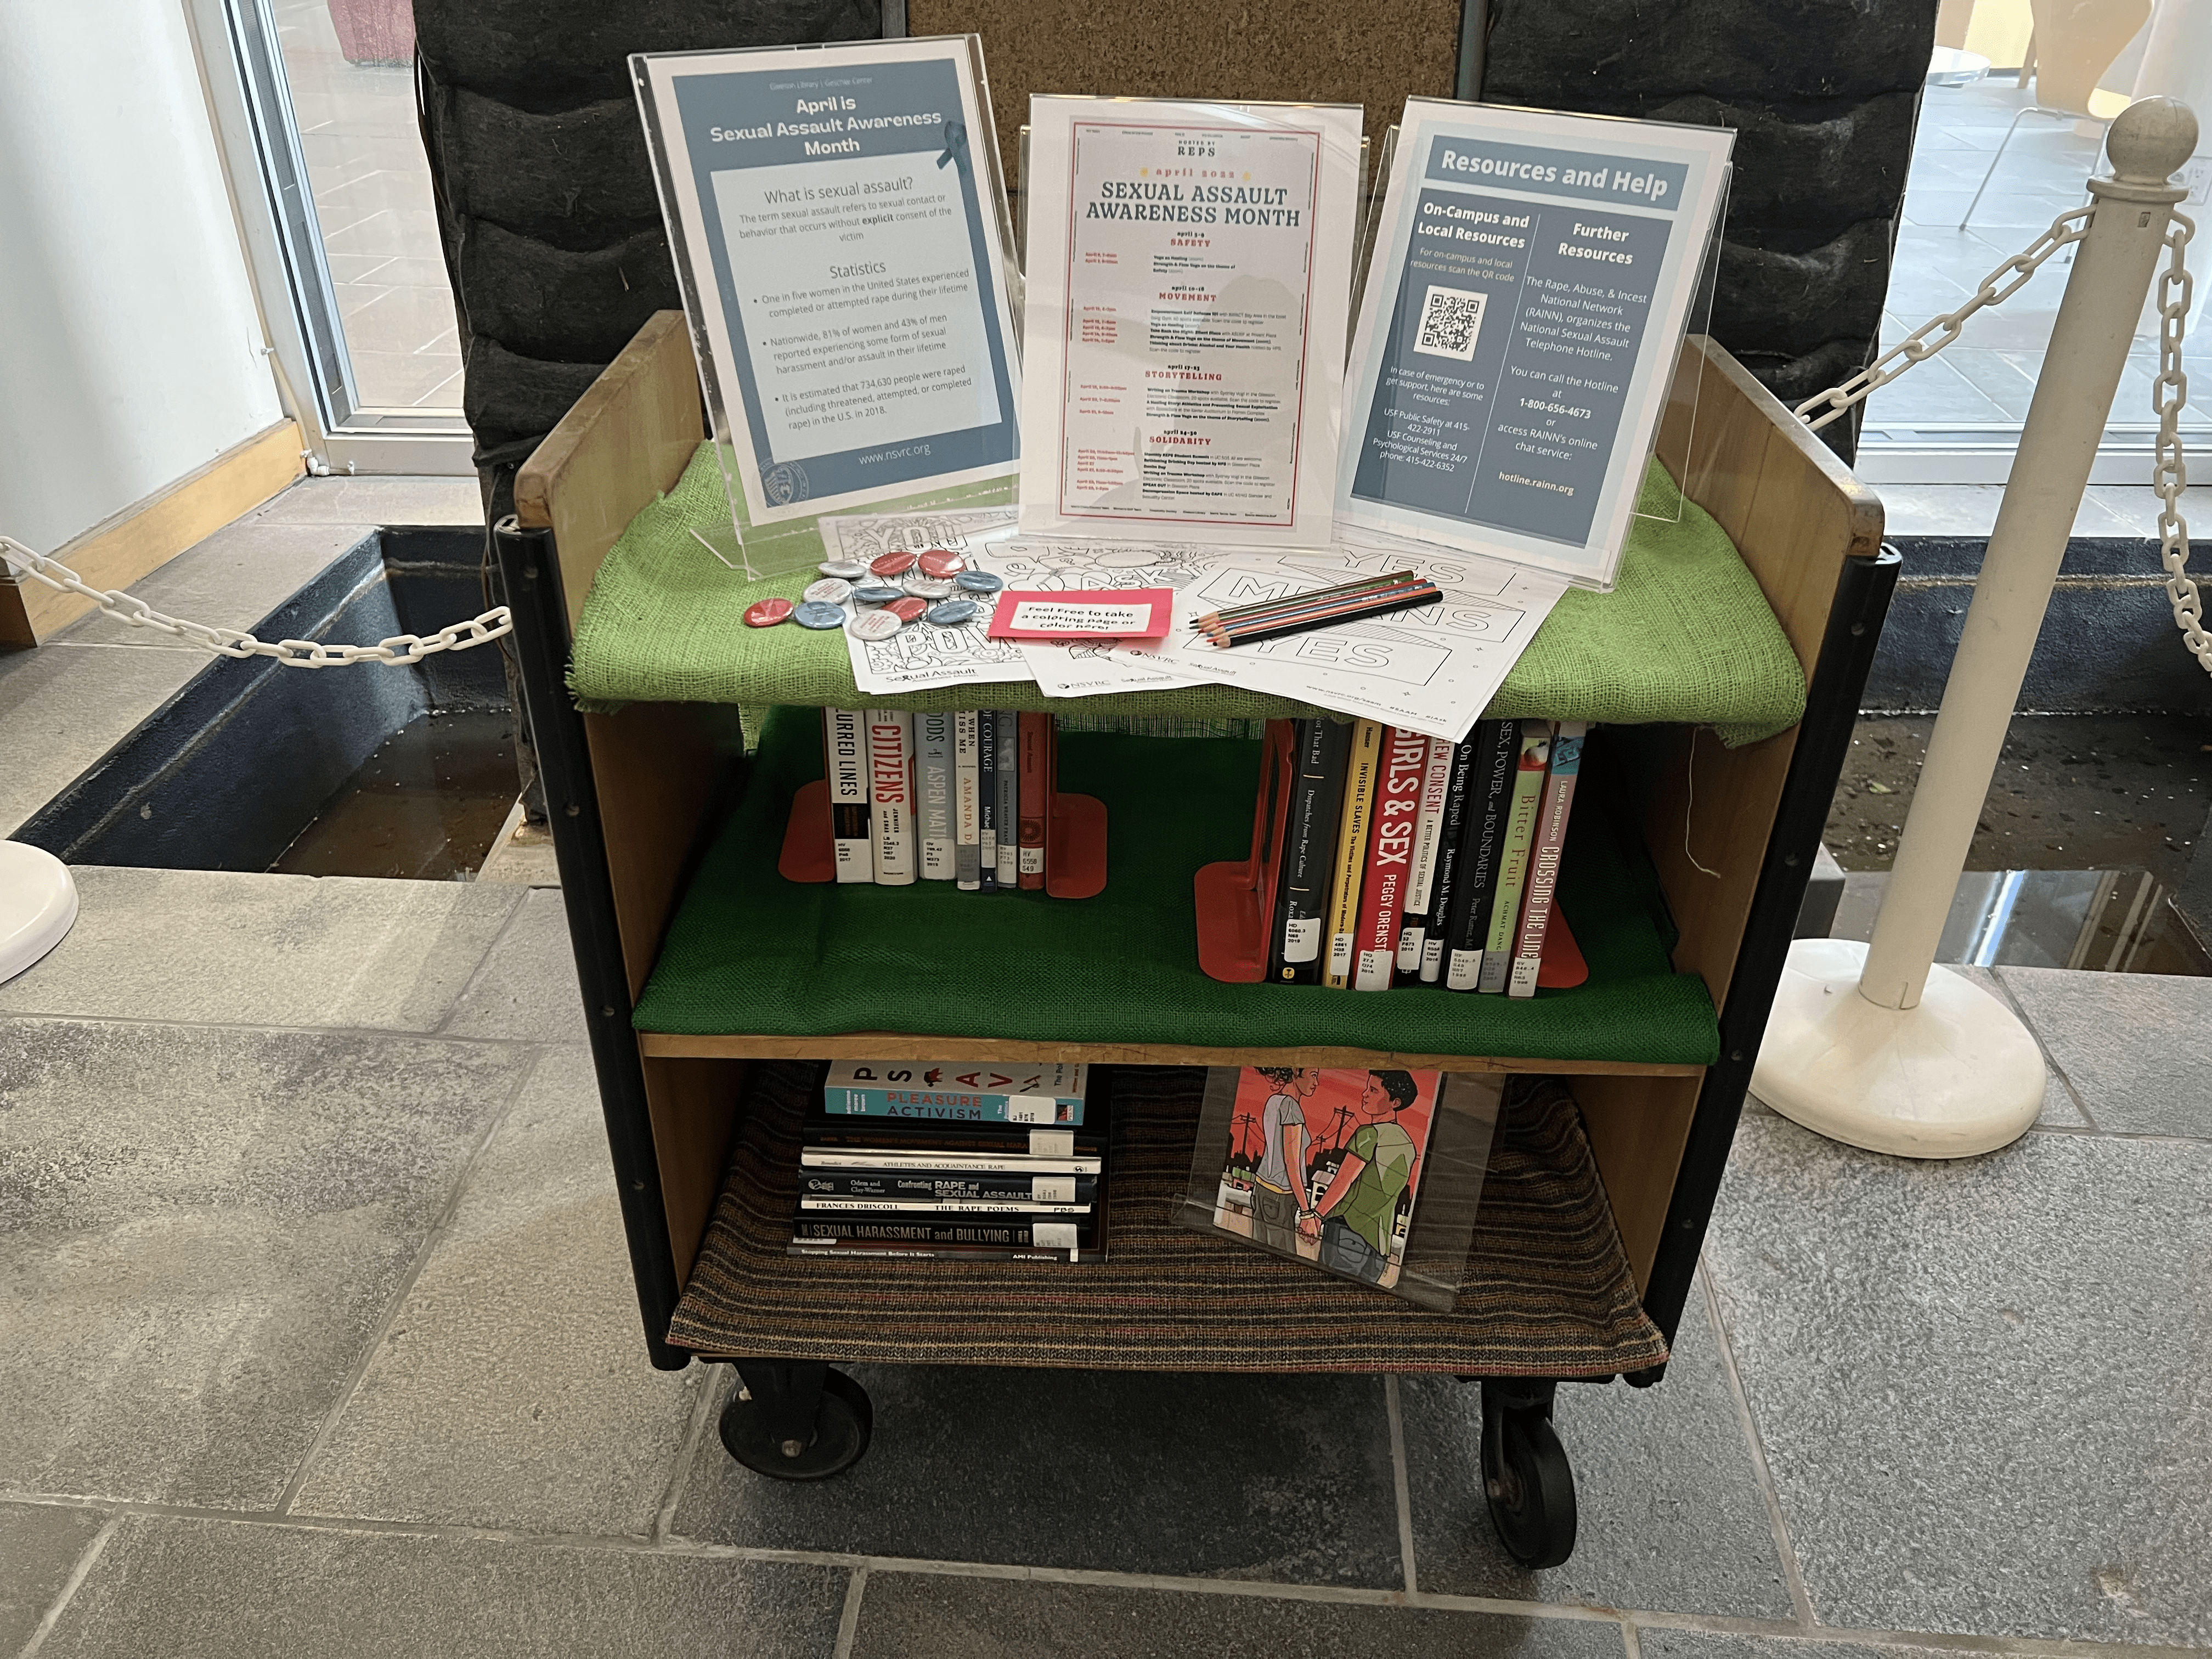 Picture of the library cart display for sexual assault awareness month